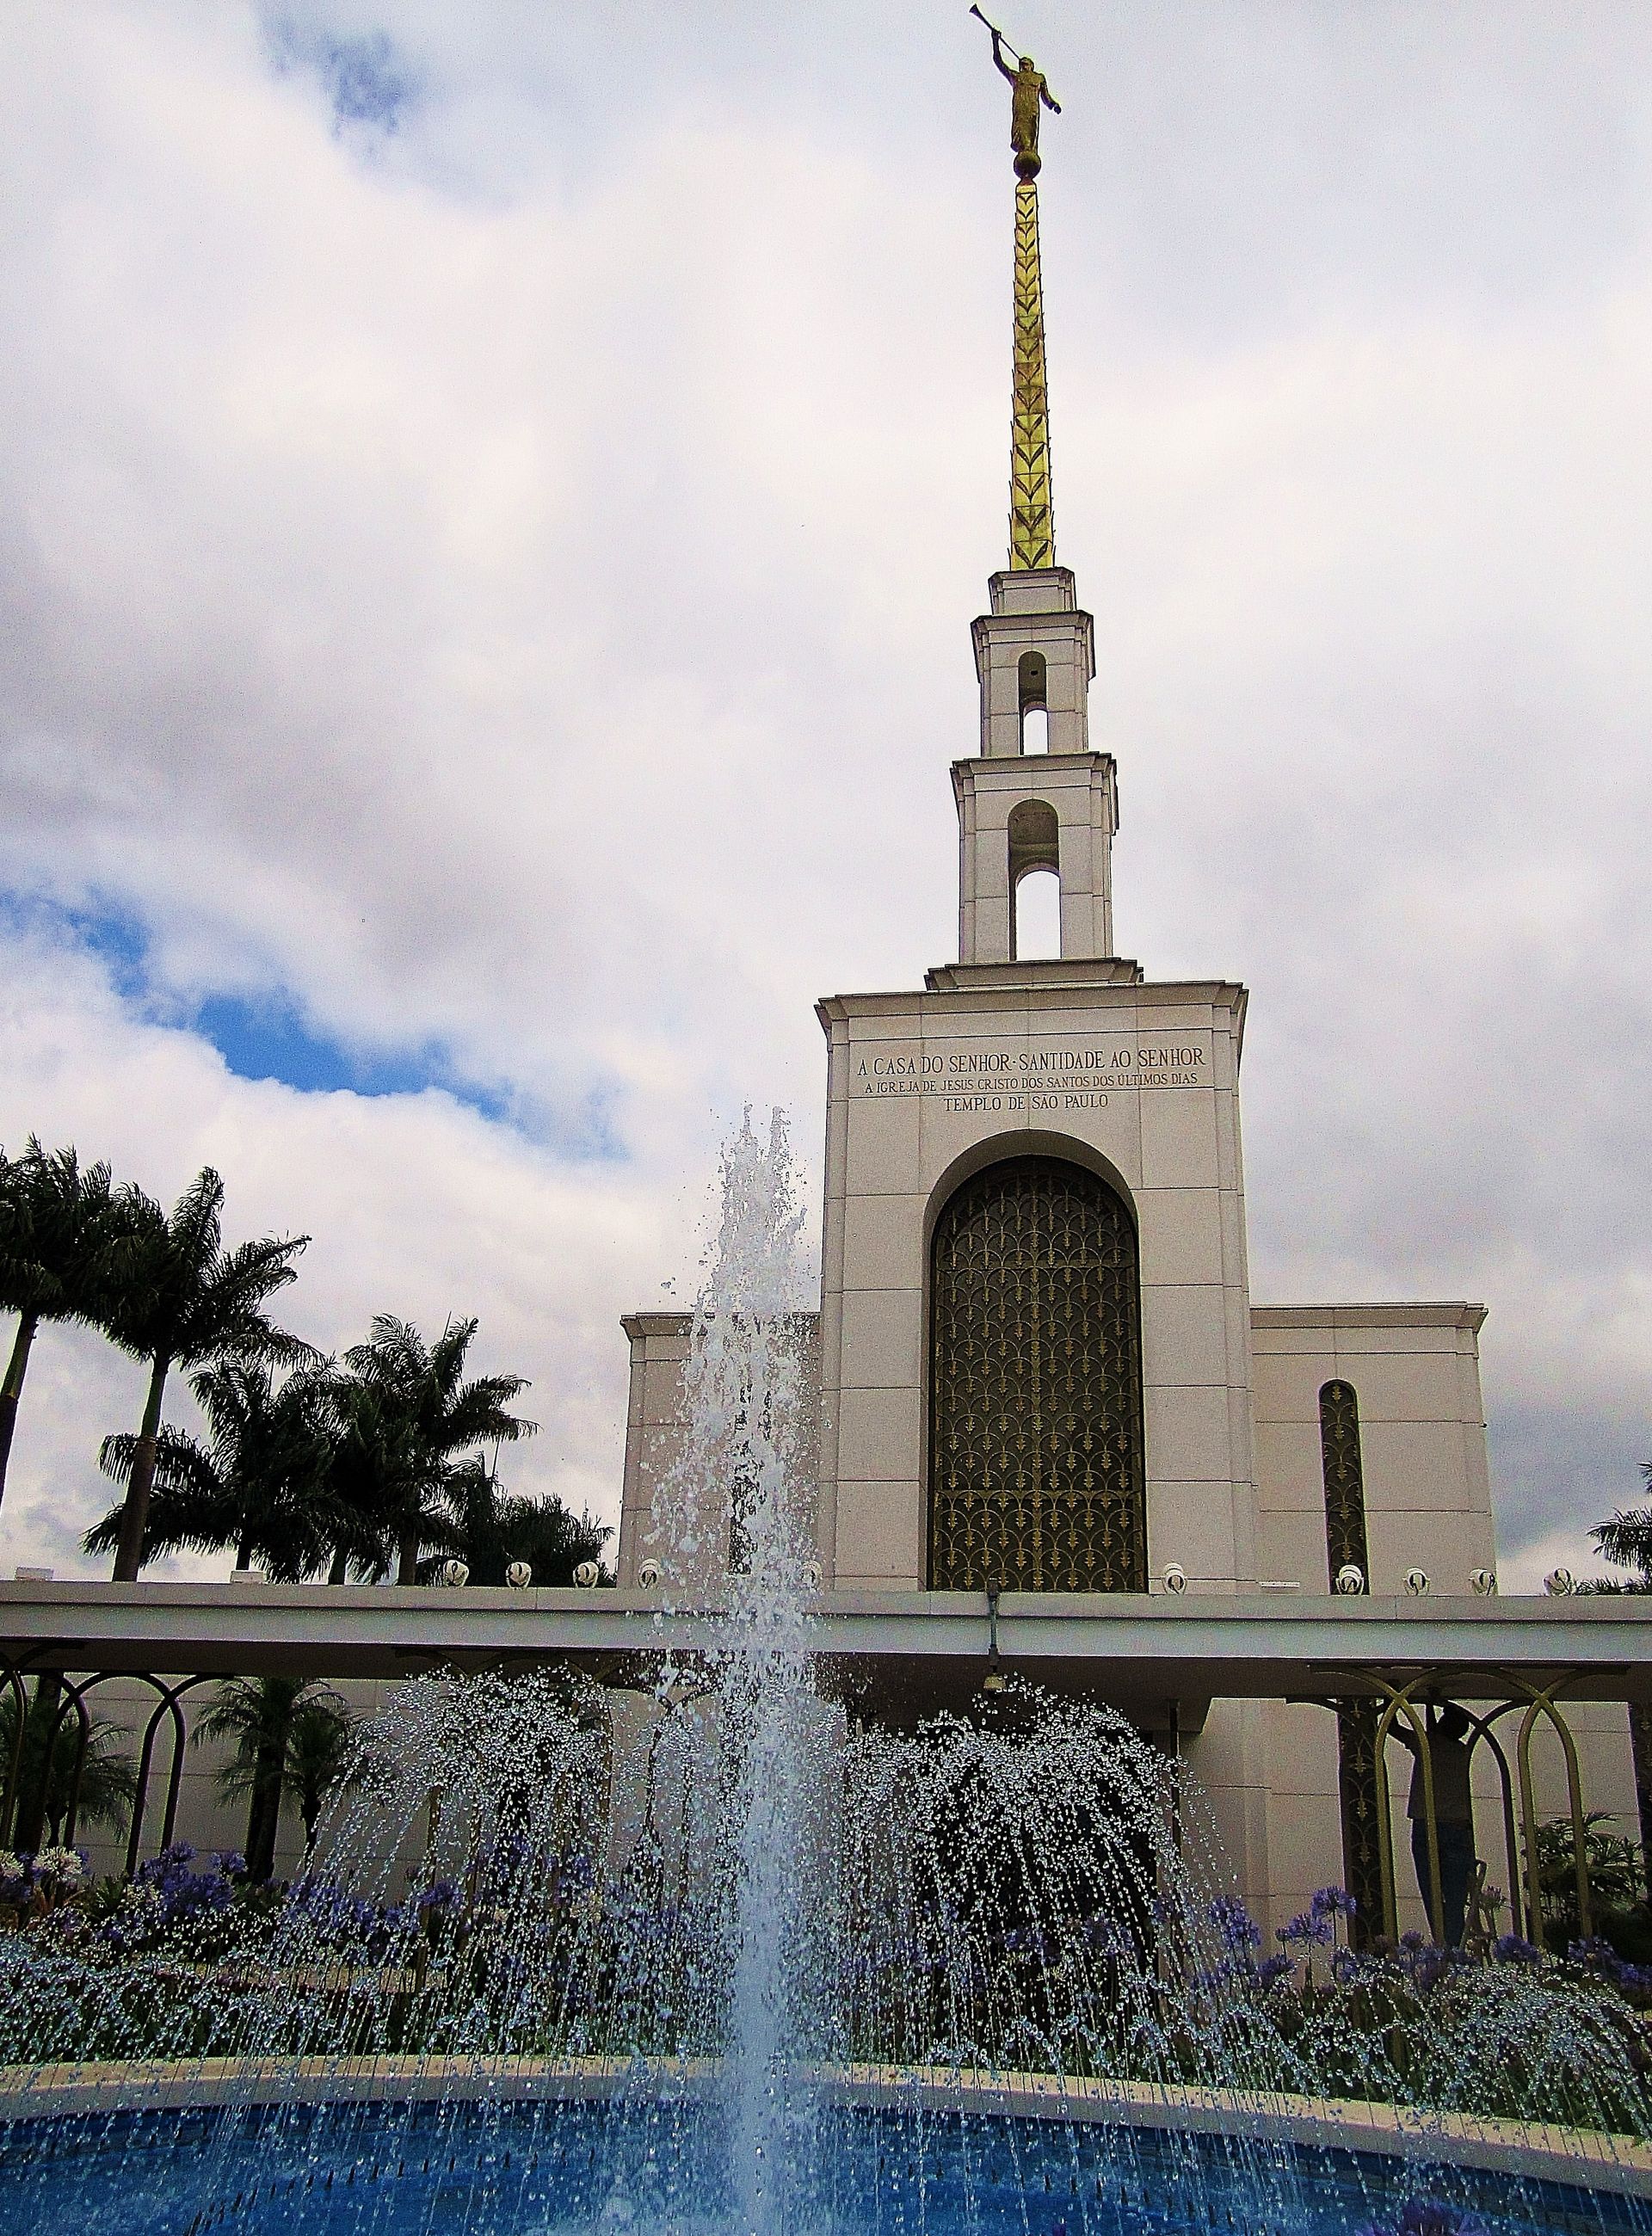 The São Paulo Brazil Temple fountain, including the spire and entrance.